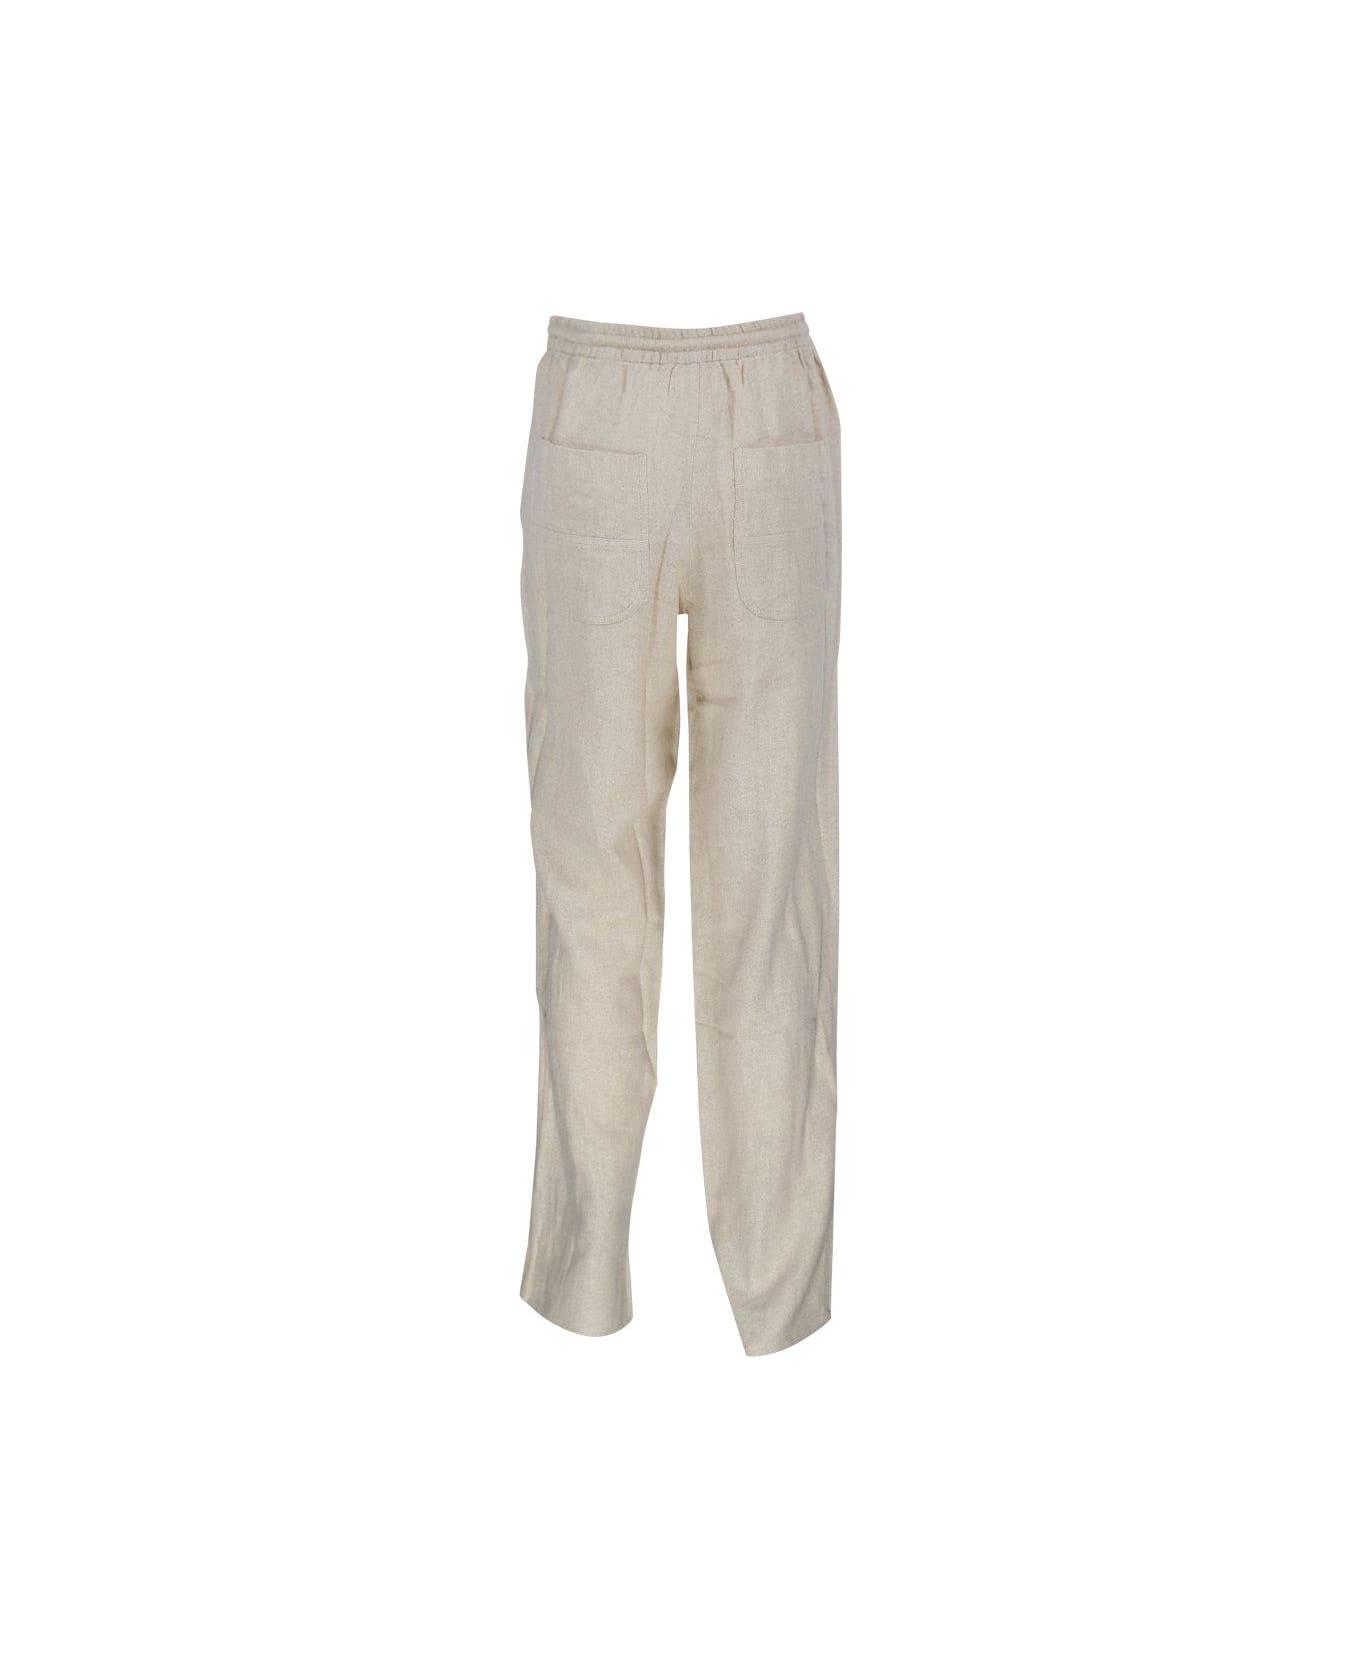 Marant Étoile Mid-rise Drawstring Tapered Trousers - Beige ボトムス